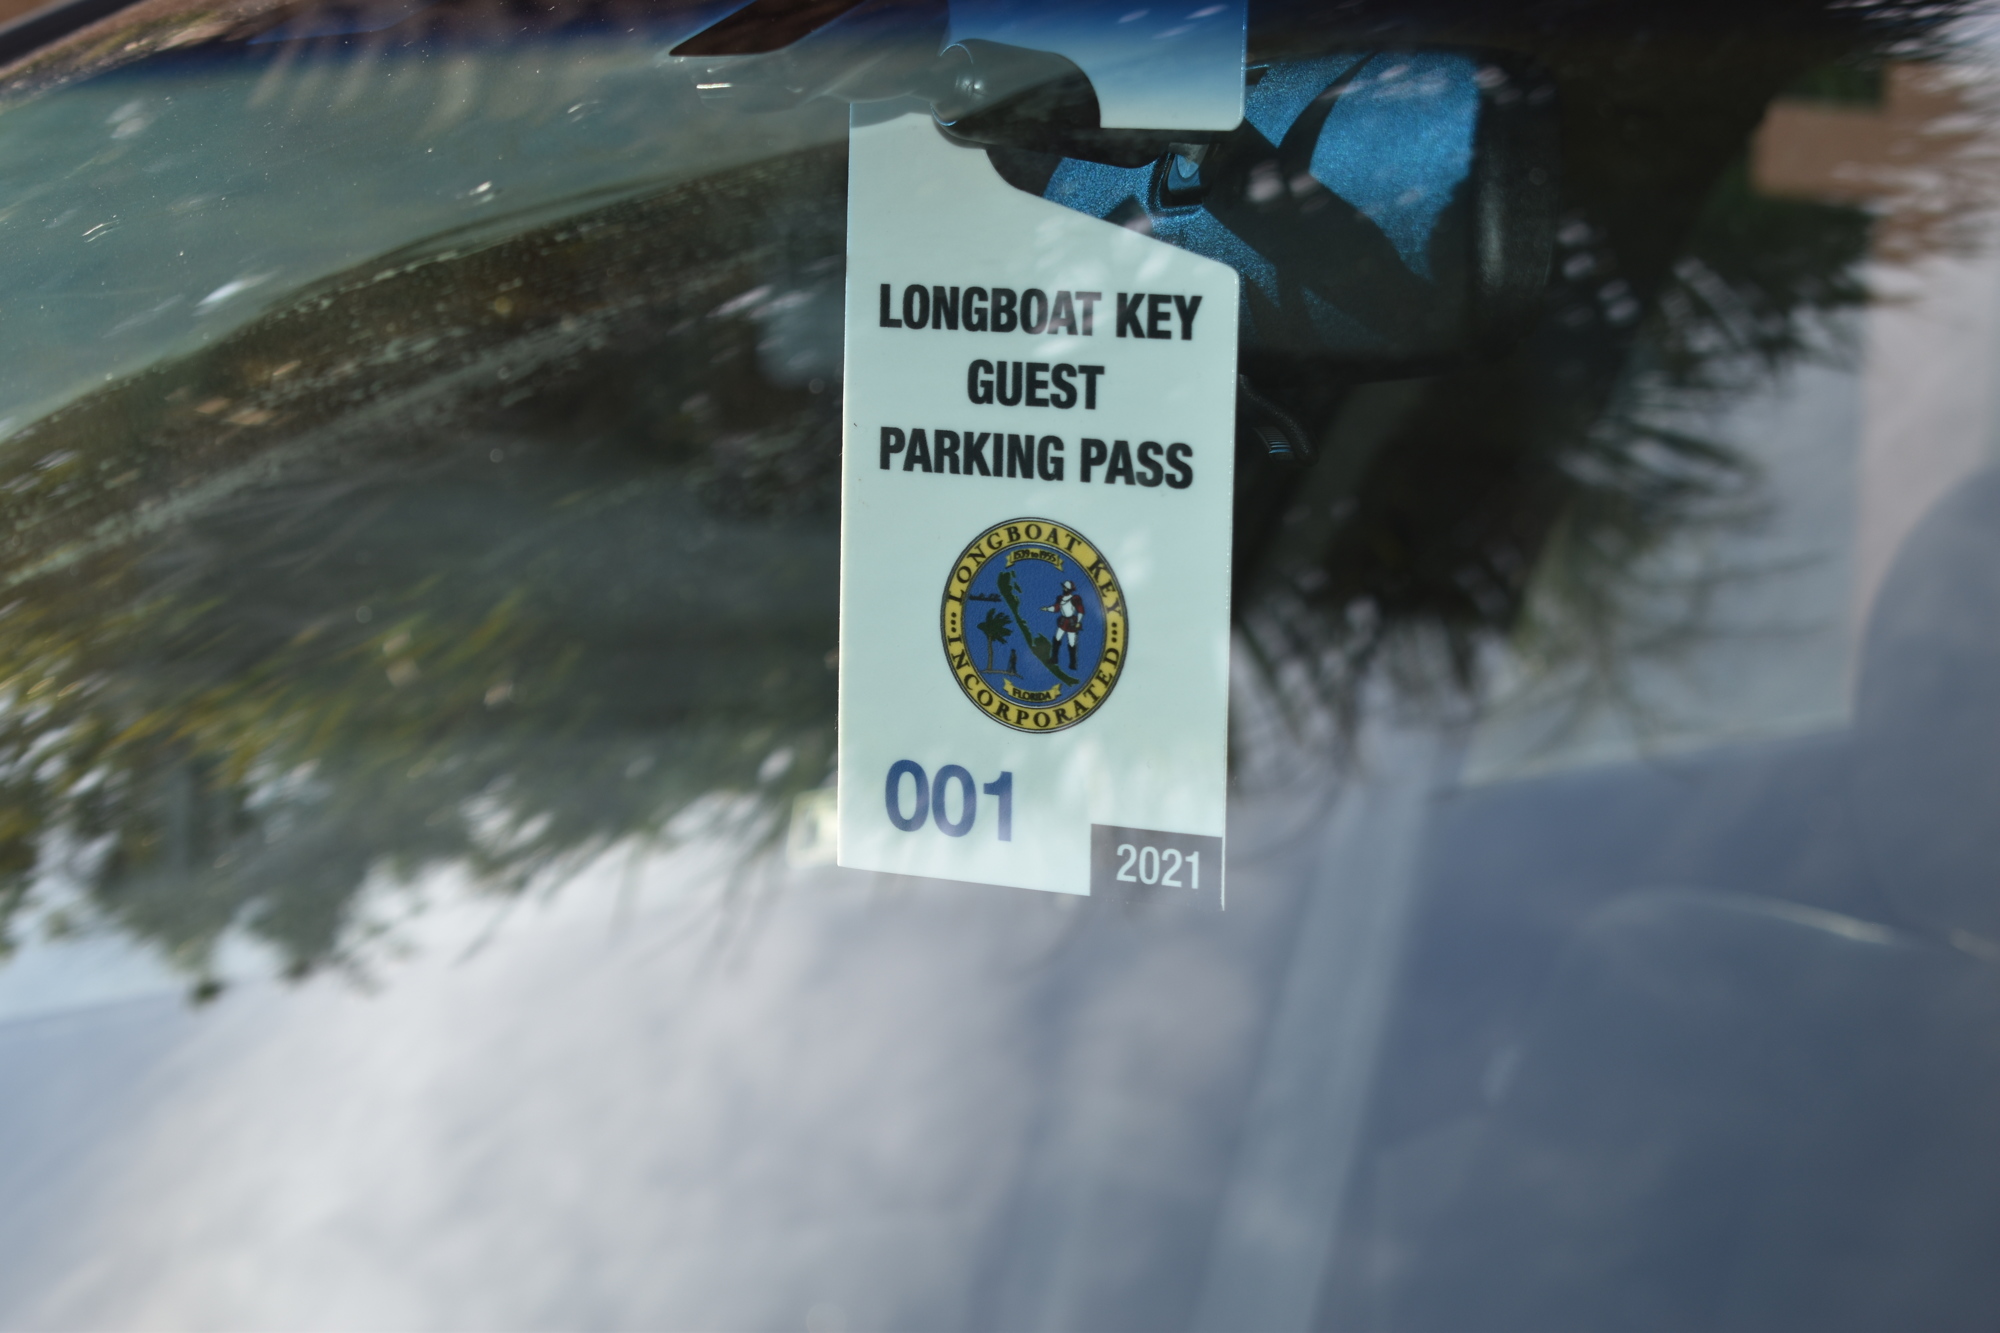 Longboat Key guest parking passes for the Longbeach Village neighborhood cost $30 each year.